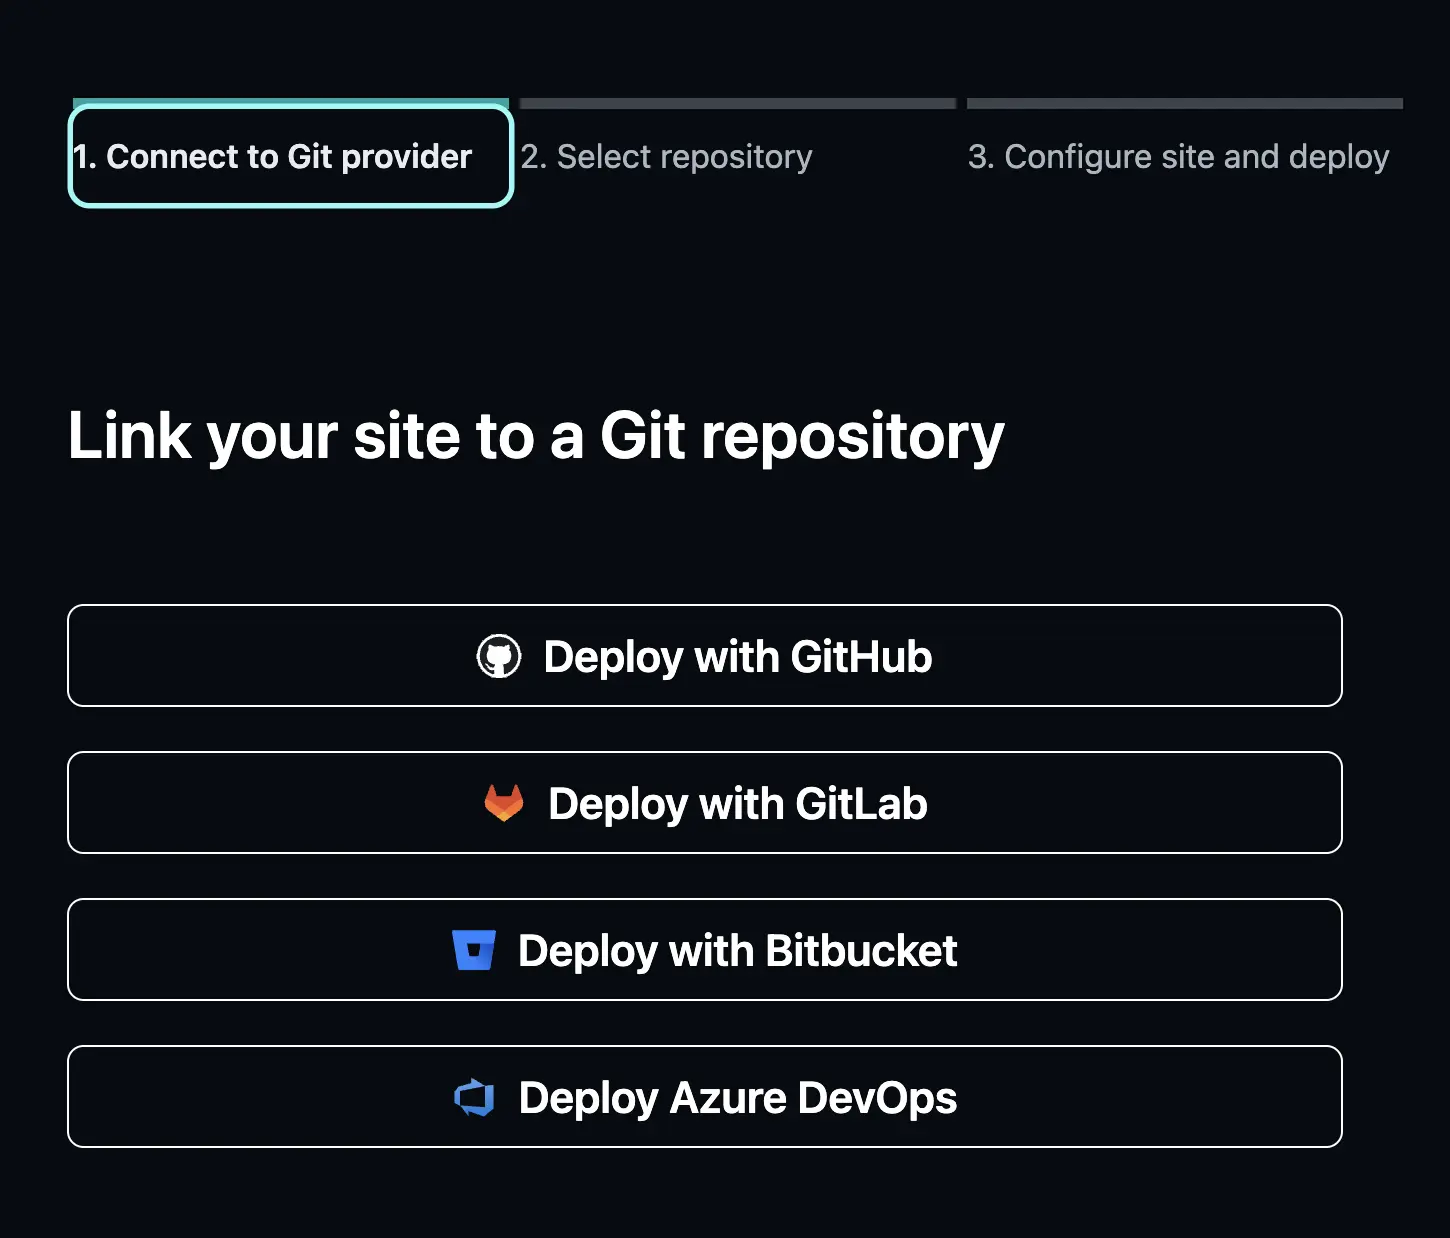 Netlify site to connect to Git provider. Options to link site to Git repository for GitHub, GitLab, Bitbucket, and Azure DevOps.